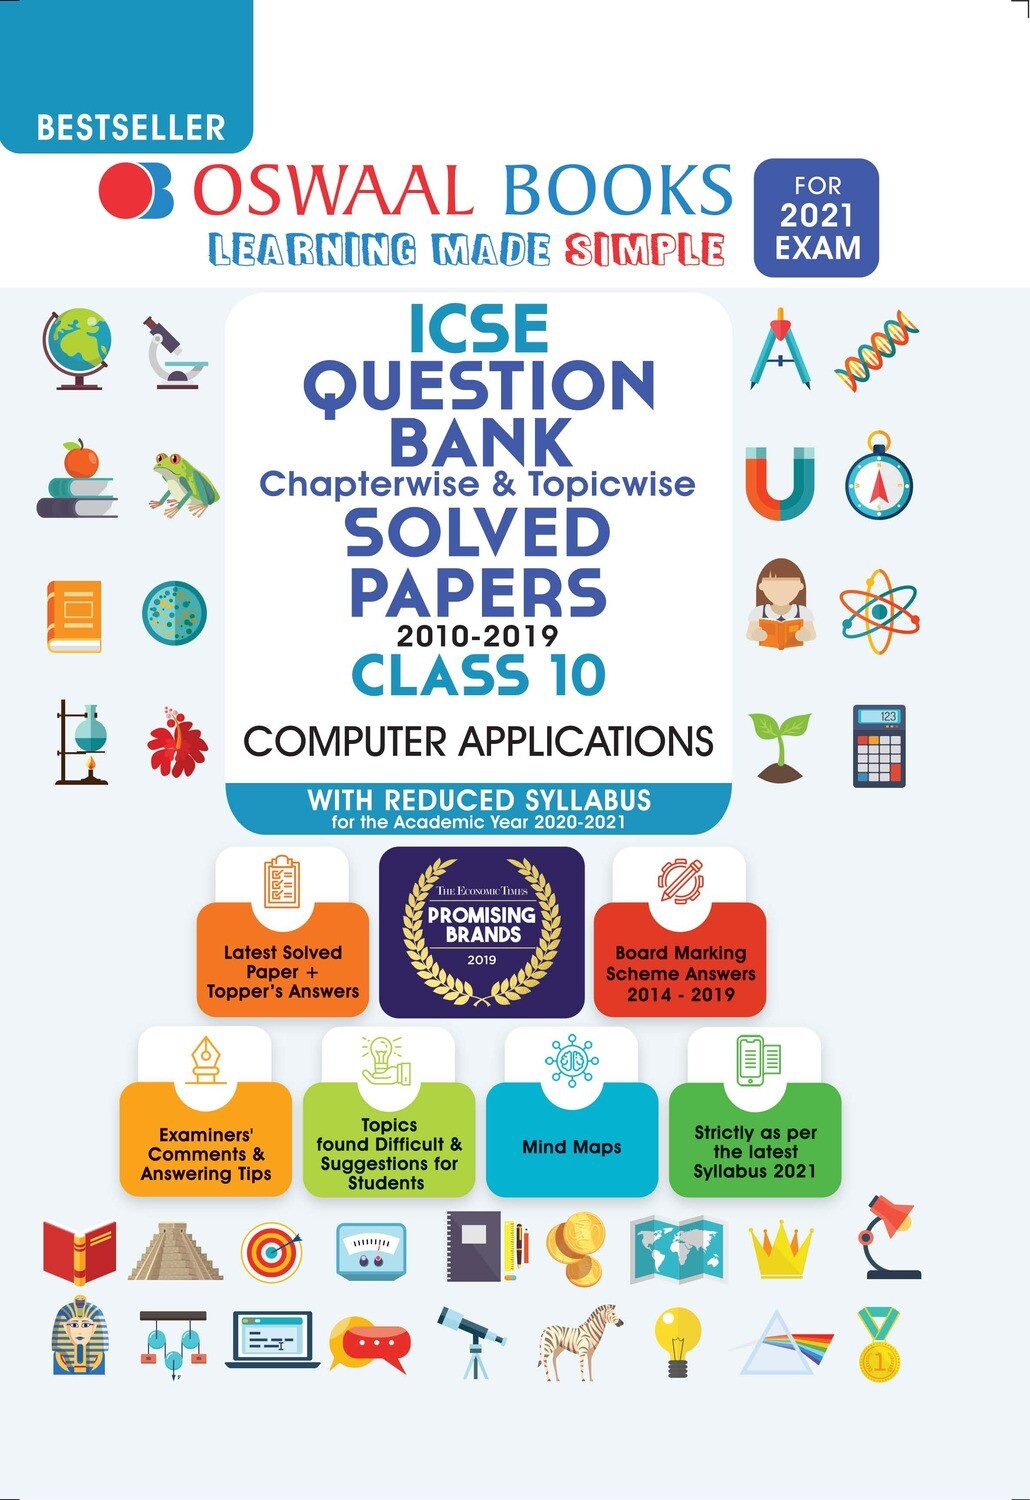 Buy e-book: Oswaal ICSE Question Bank Chapterwise & Topicwise Solved Papers, Computer Applications, Class 10 (Re